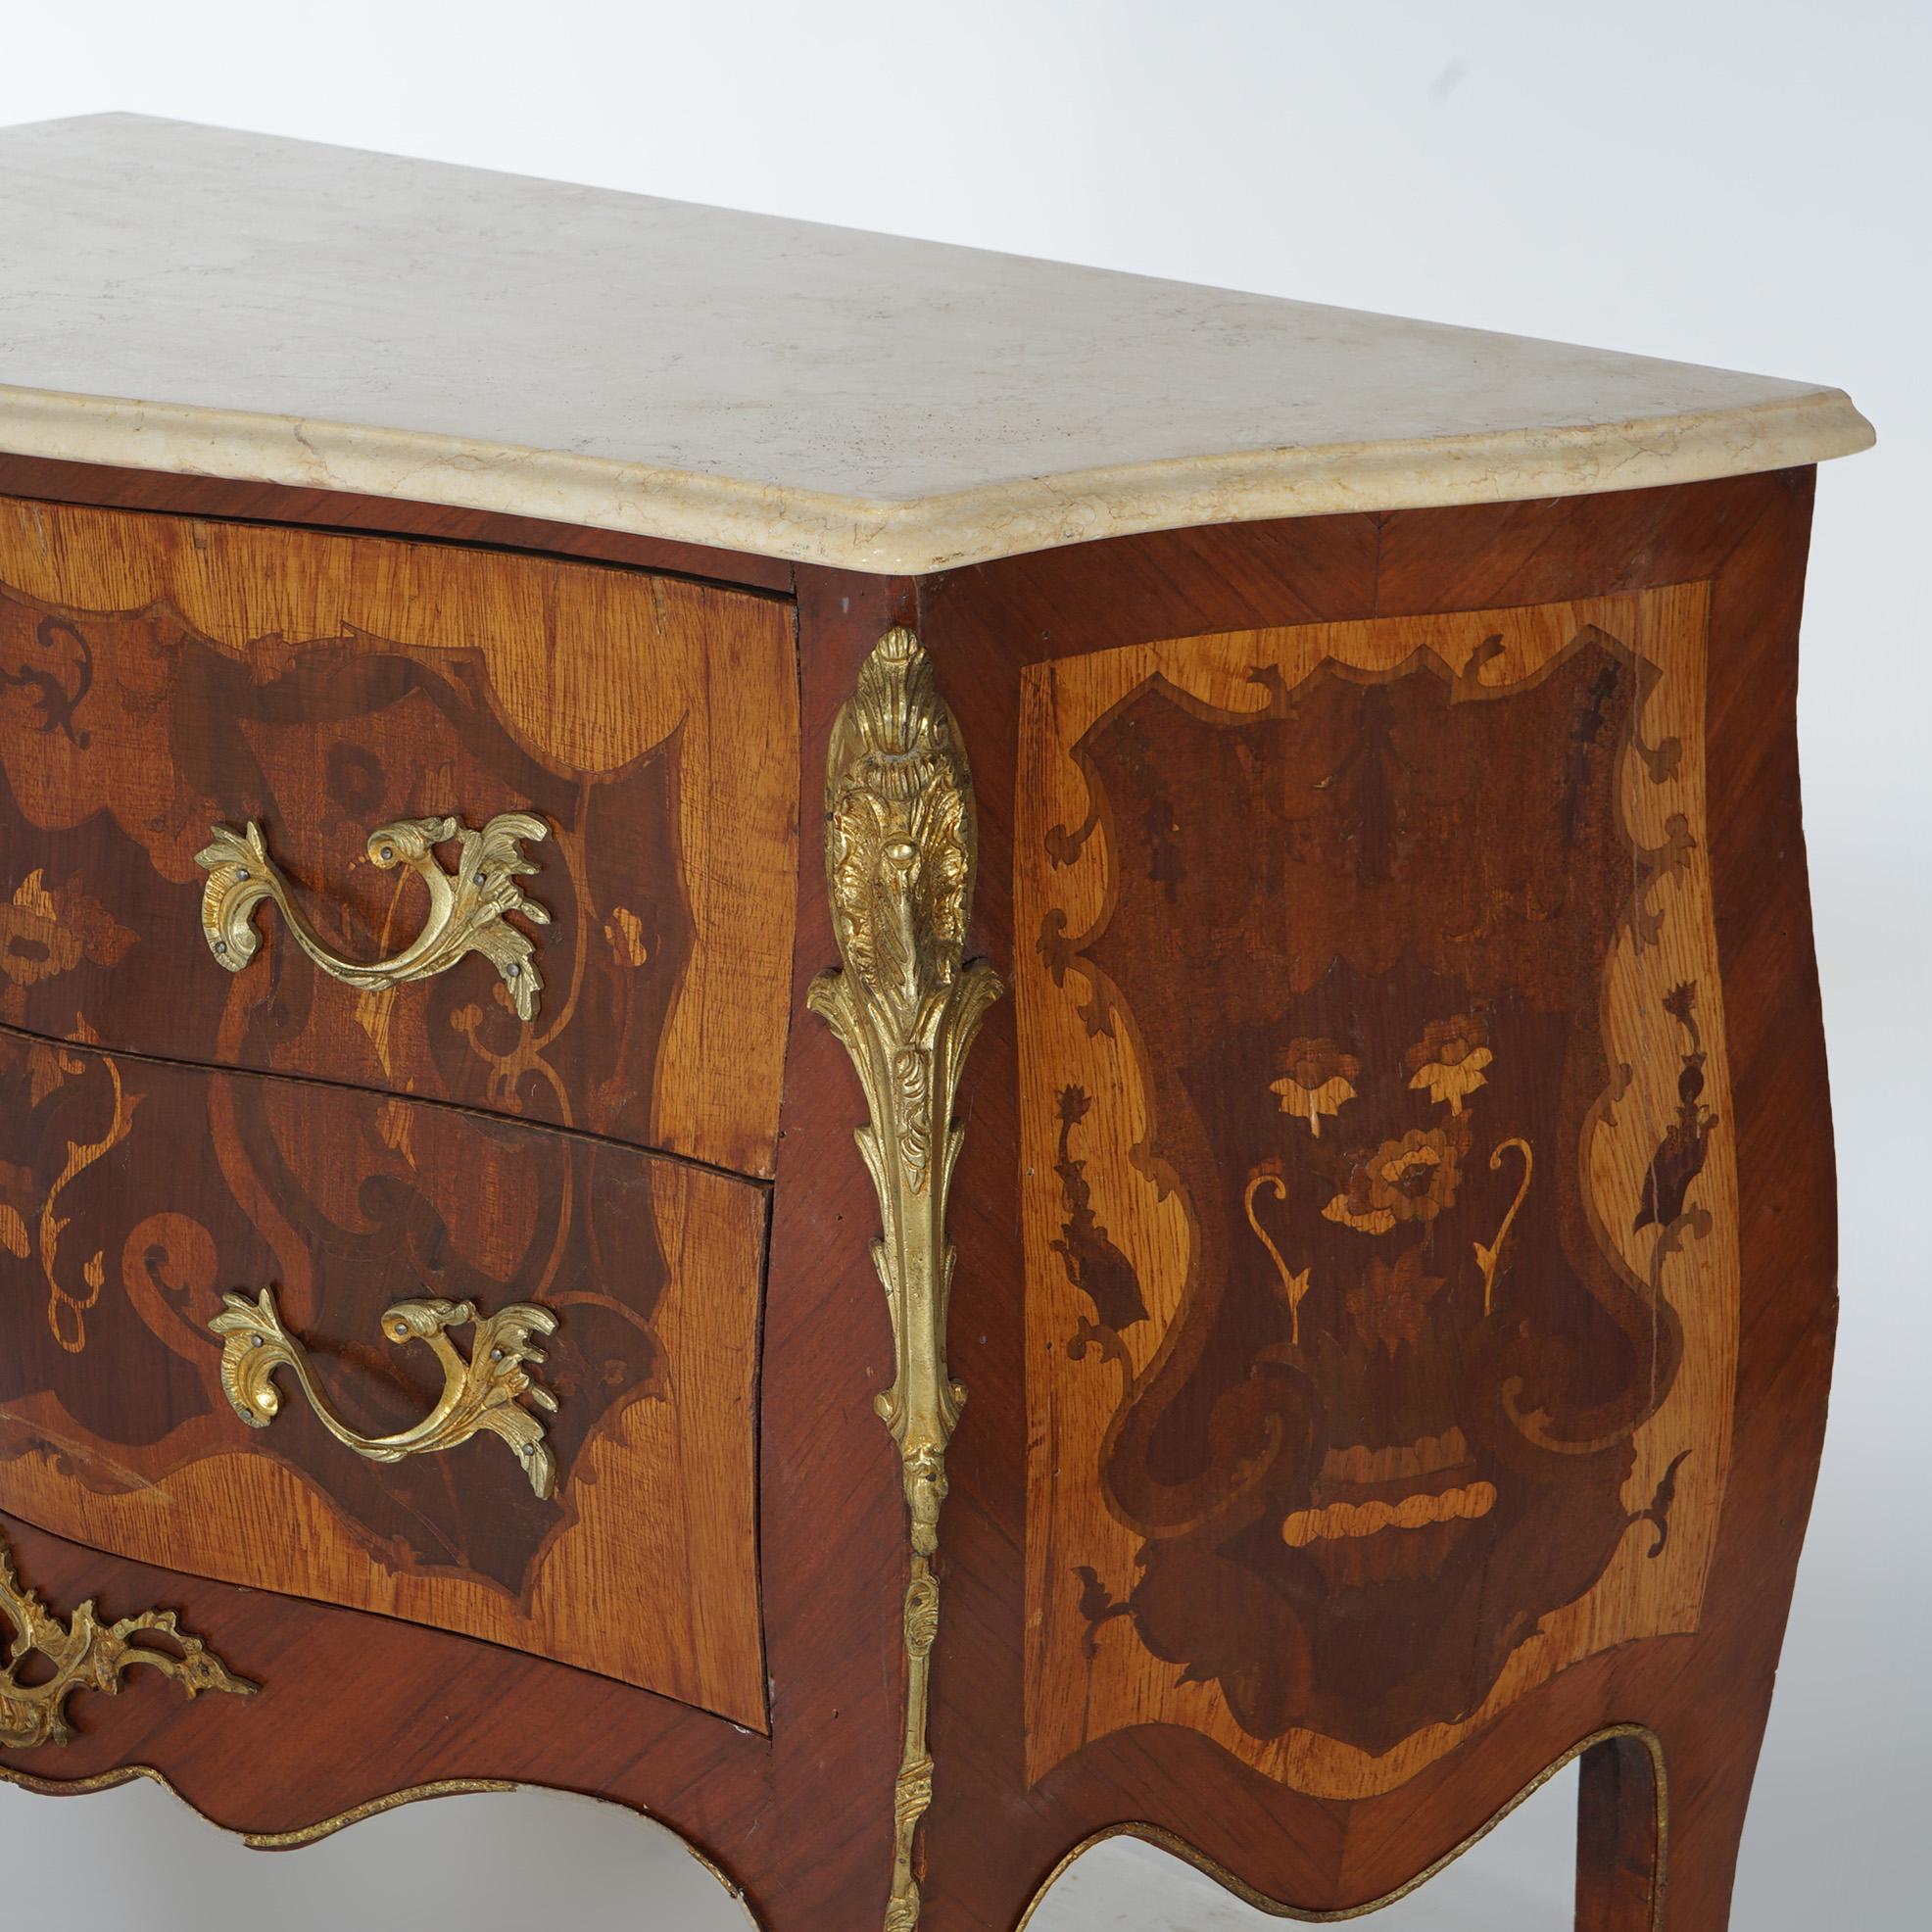 Inlay Antique Louis XV Style Marble, Ormolu, Satinwood & Kingwood Inlaid Commode 20thC For Sale